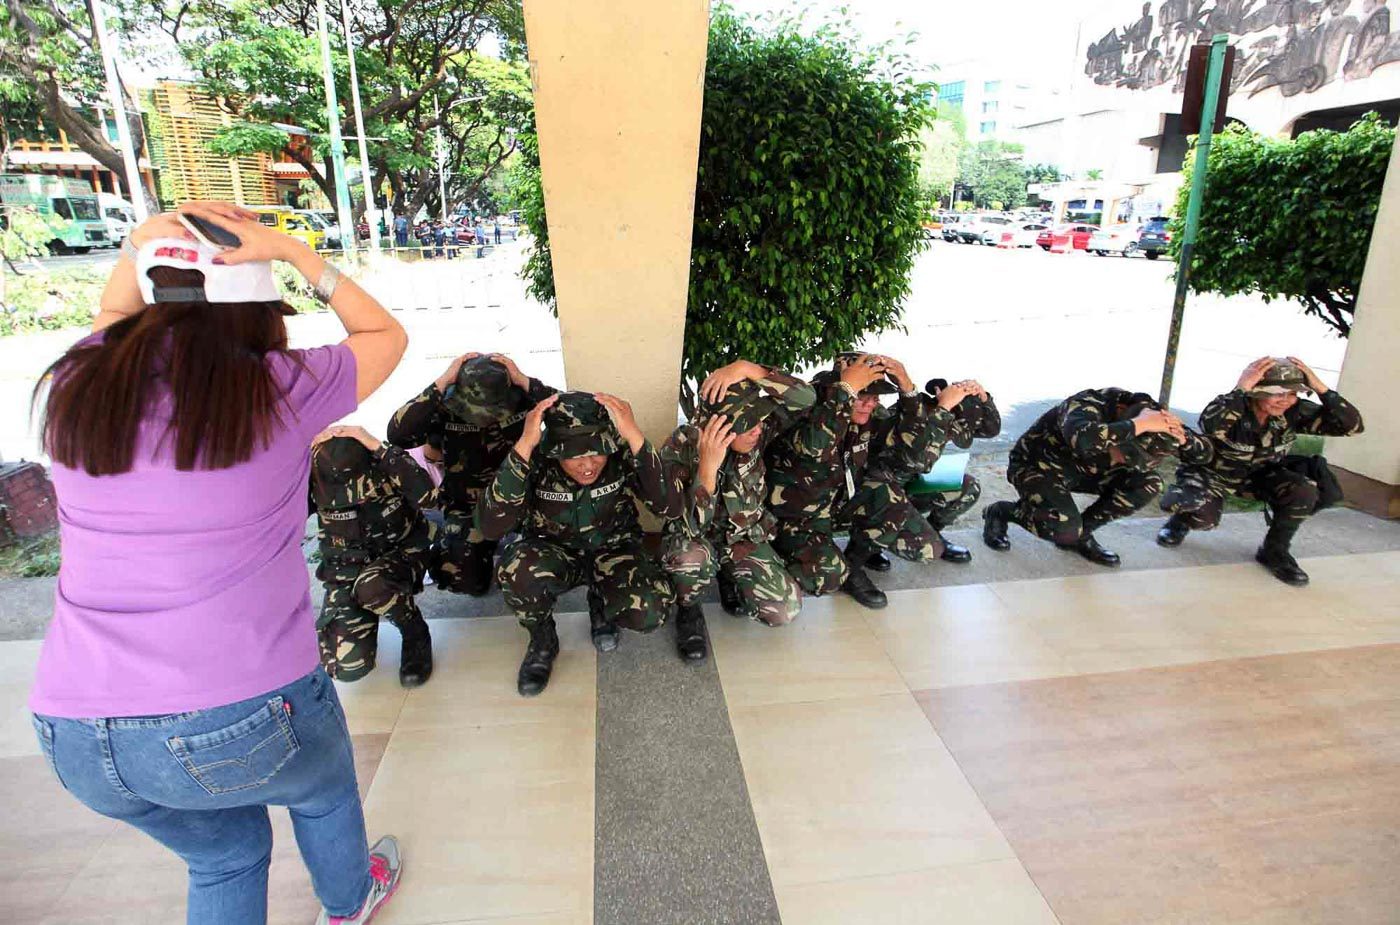 NDRRMC reschedules postponed earthquake drill to September 27